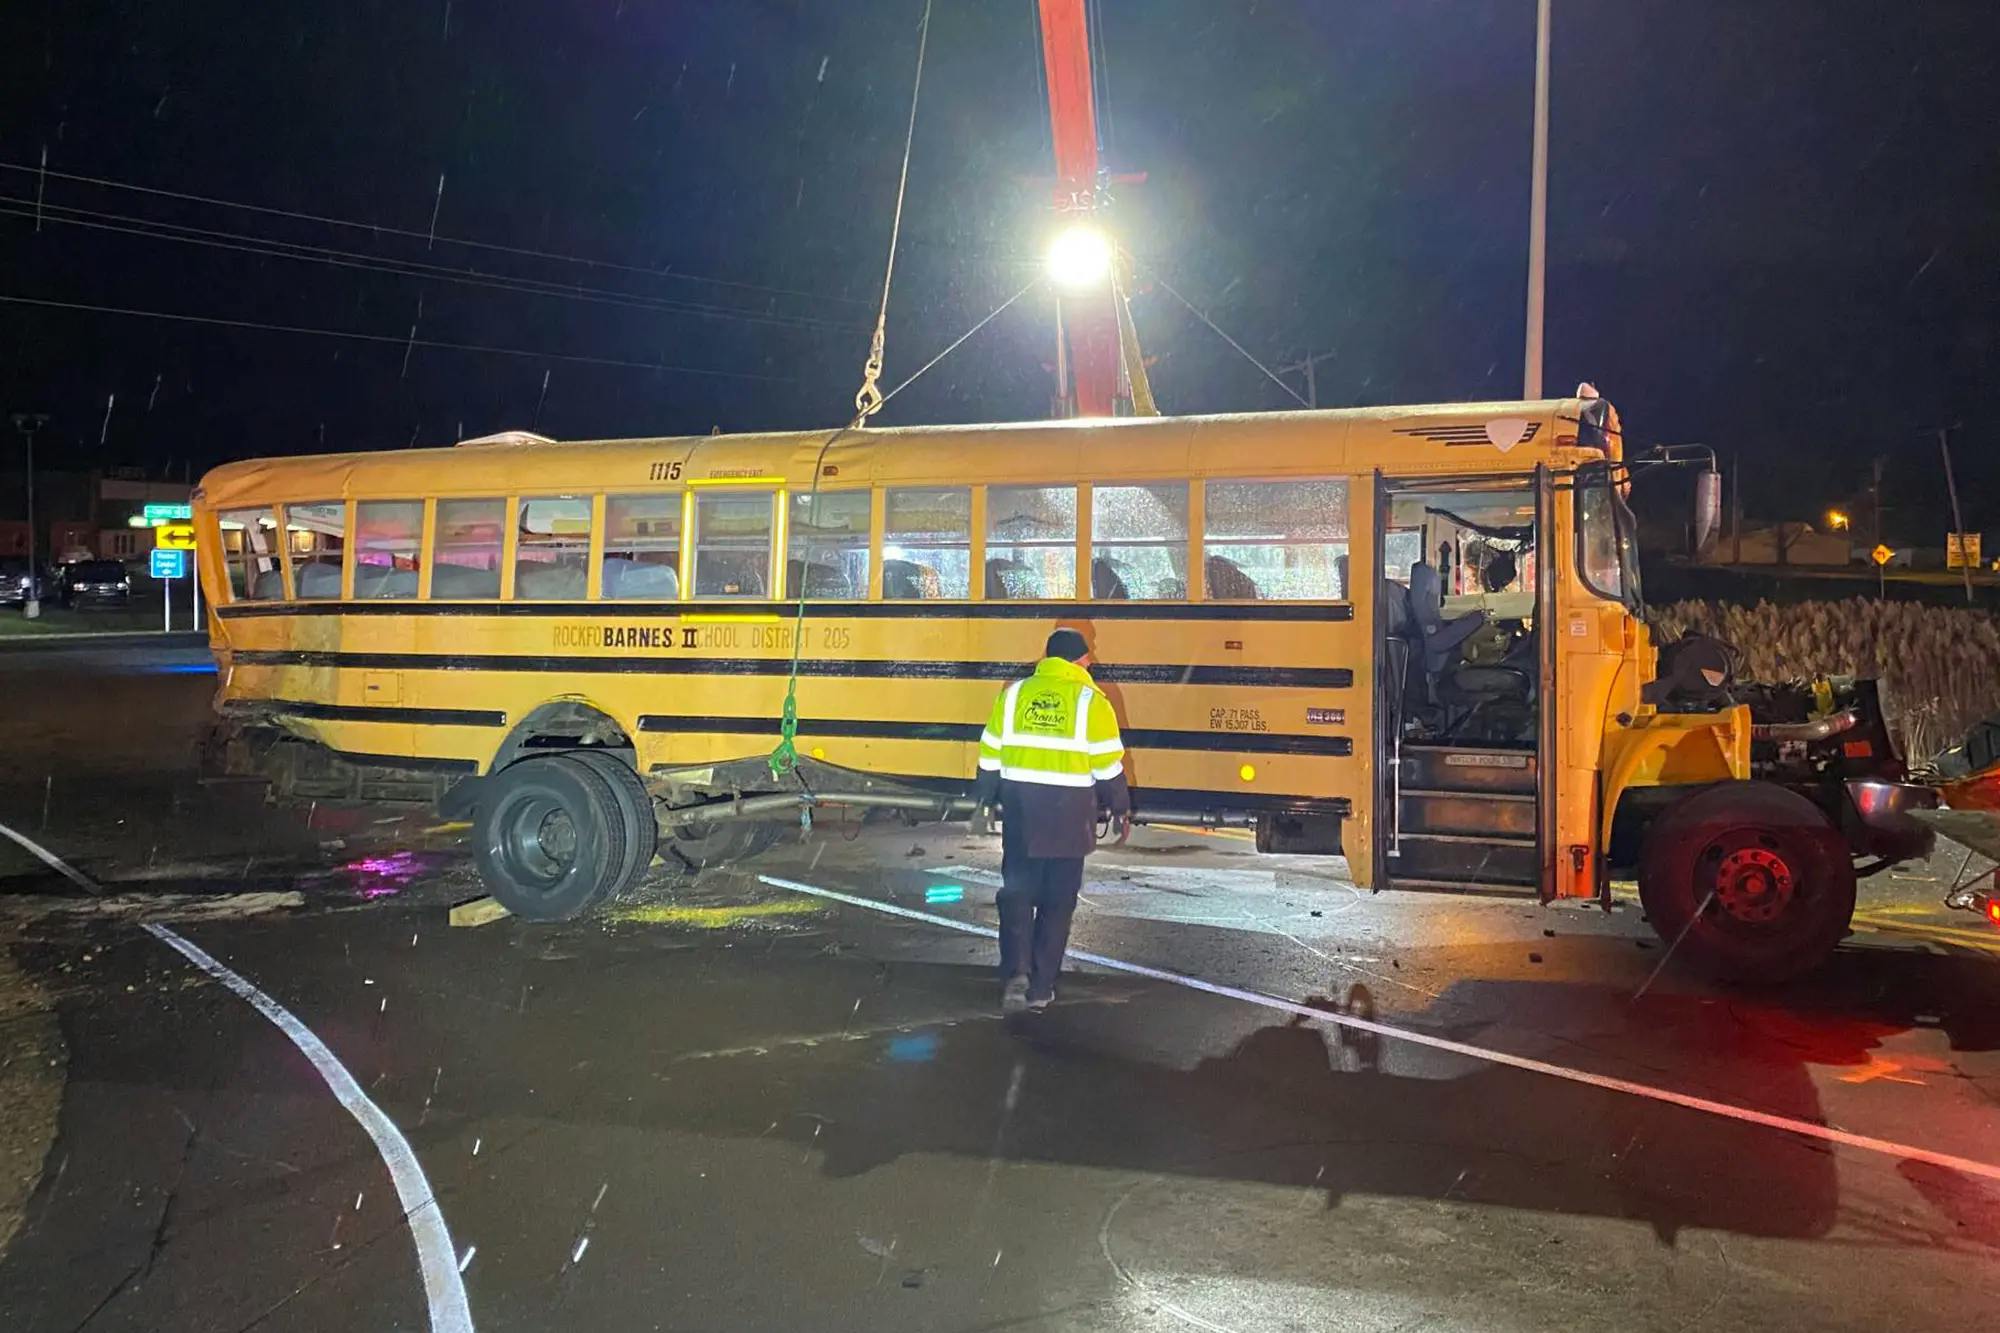 Bus carrying youth hockey team involved in crash, everyone stable